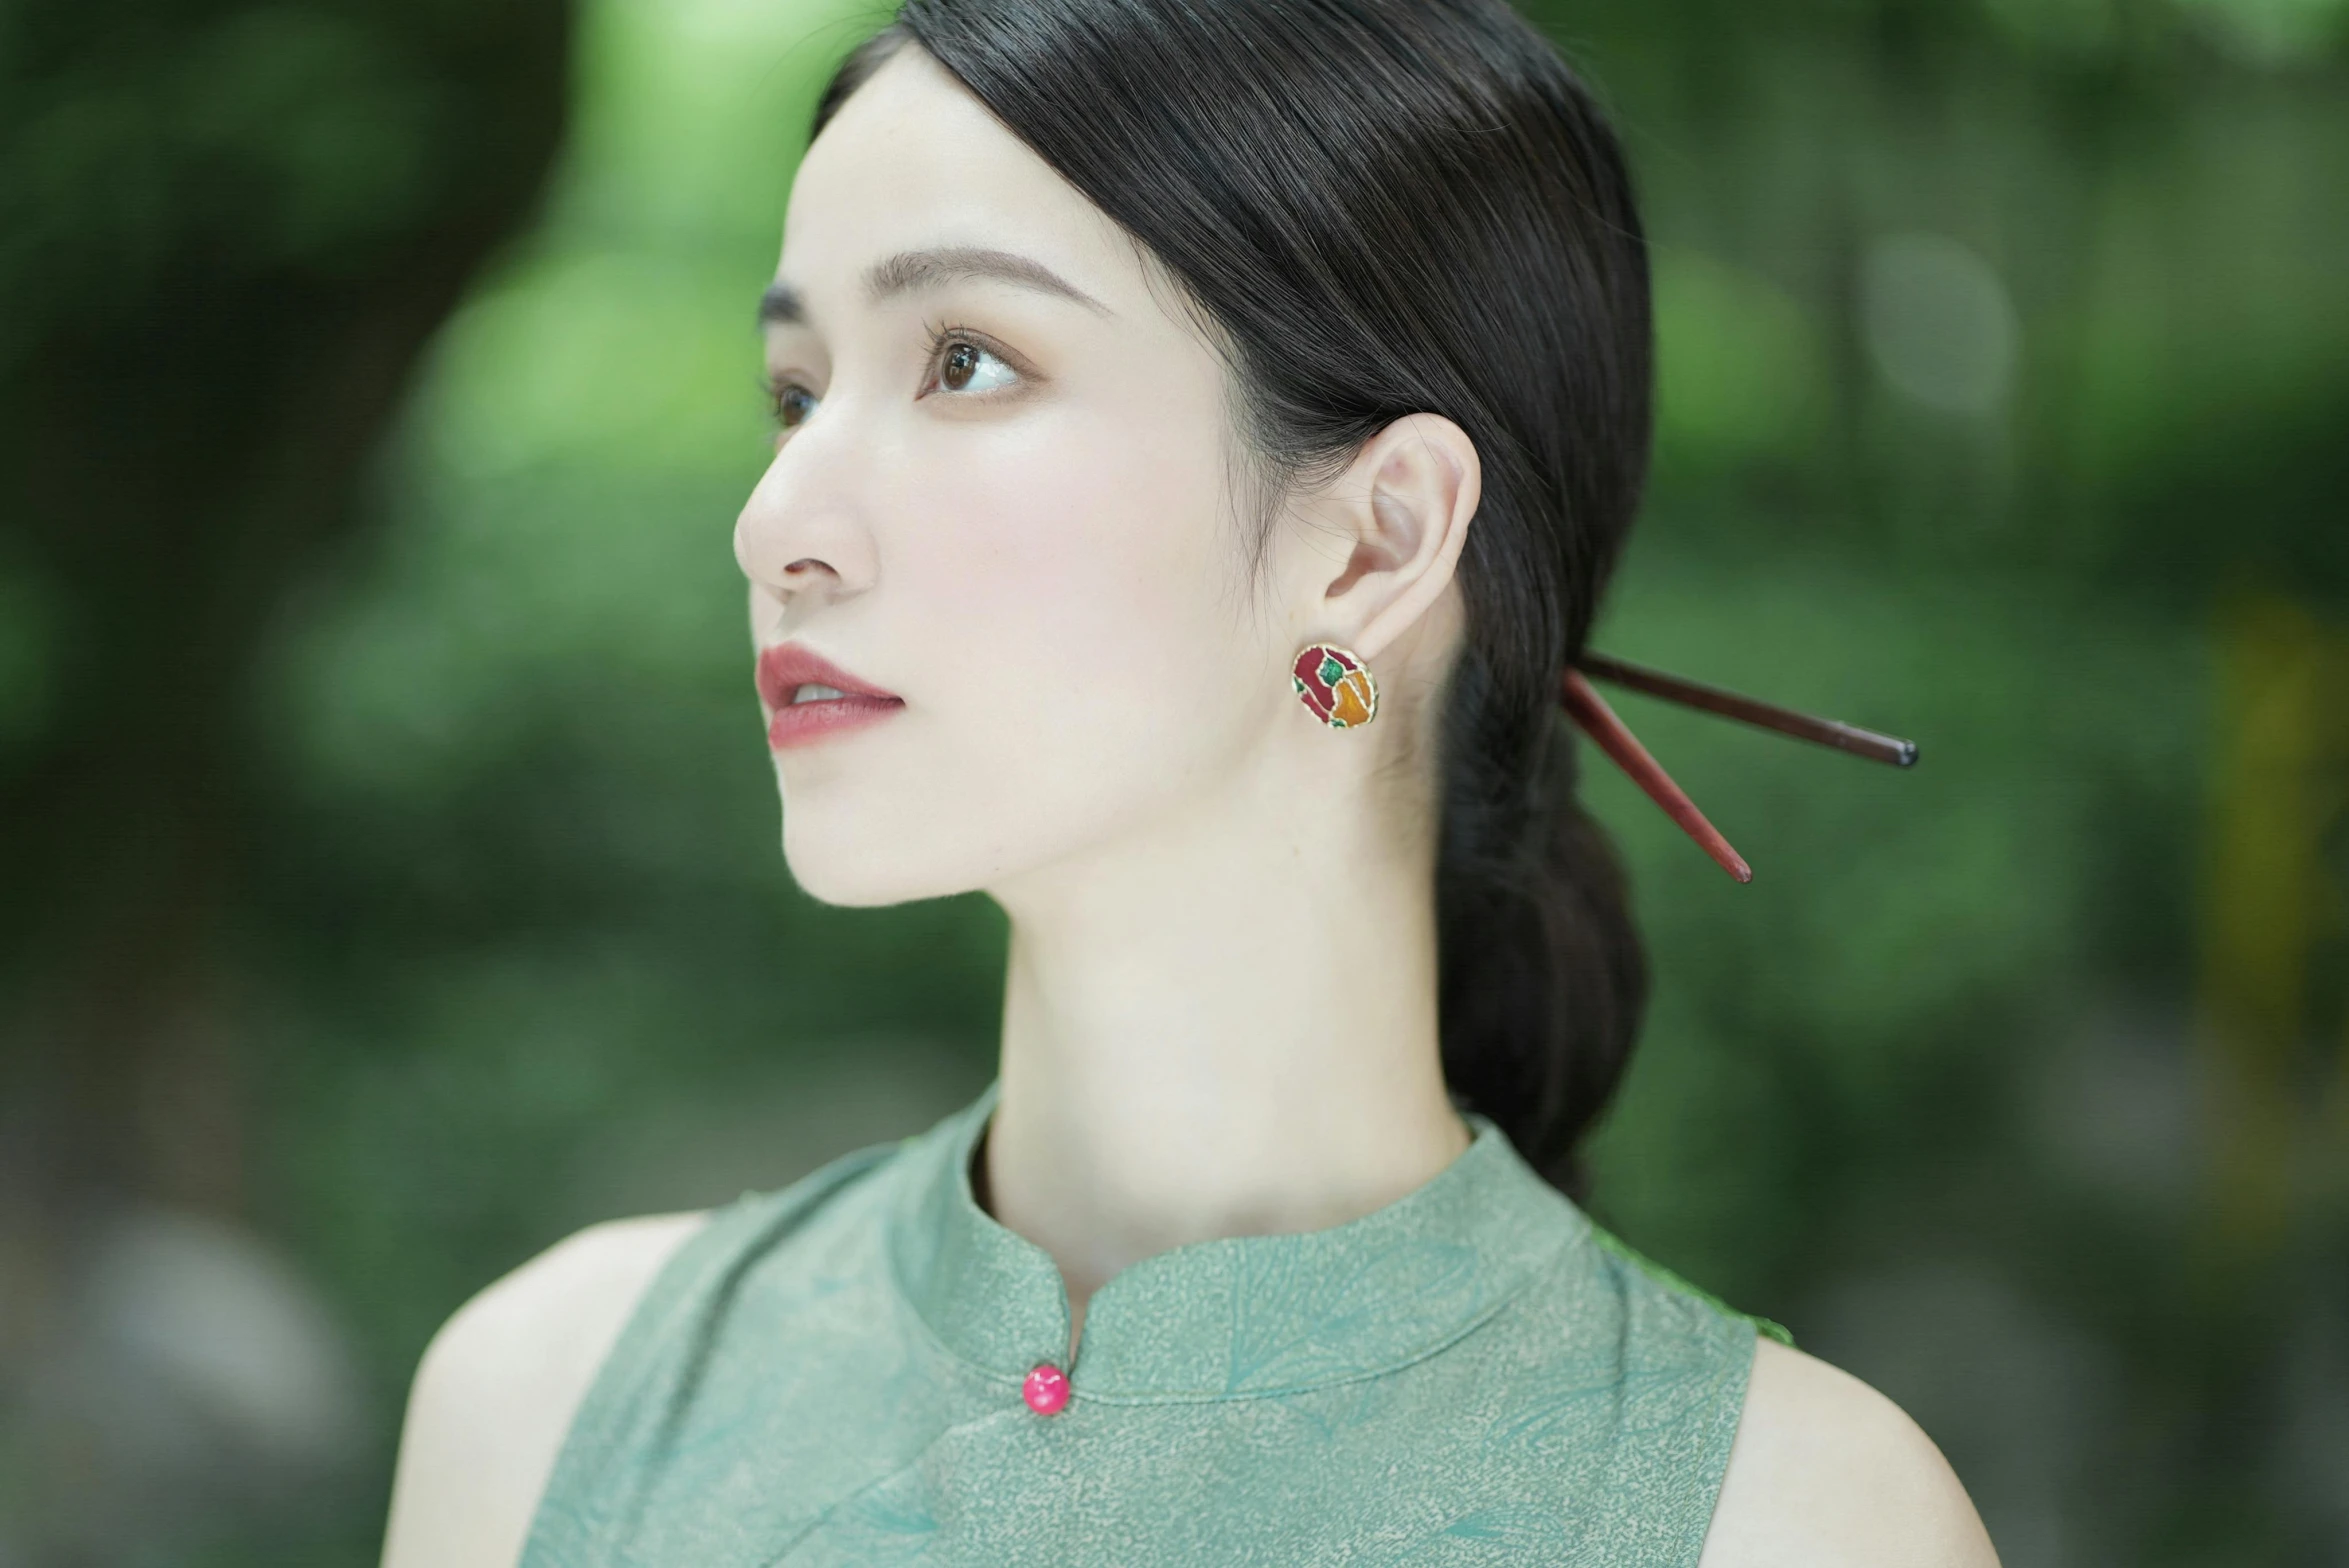 woman with black hair and green shirt and red earrings